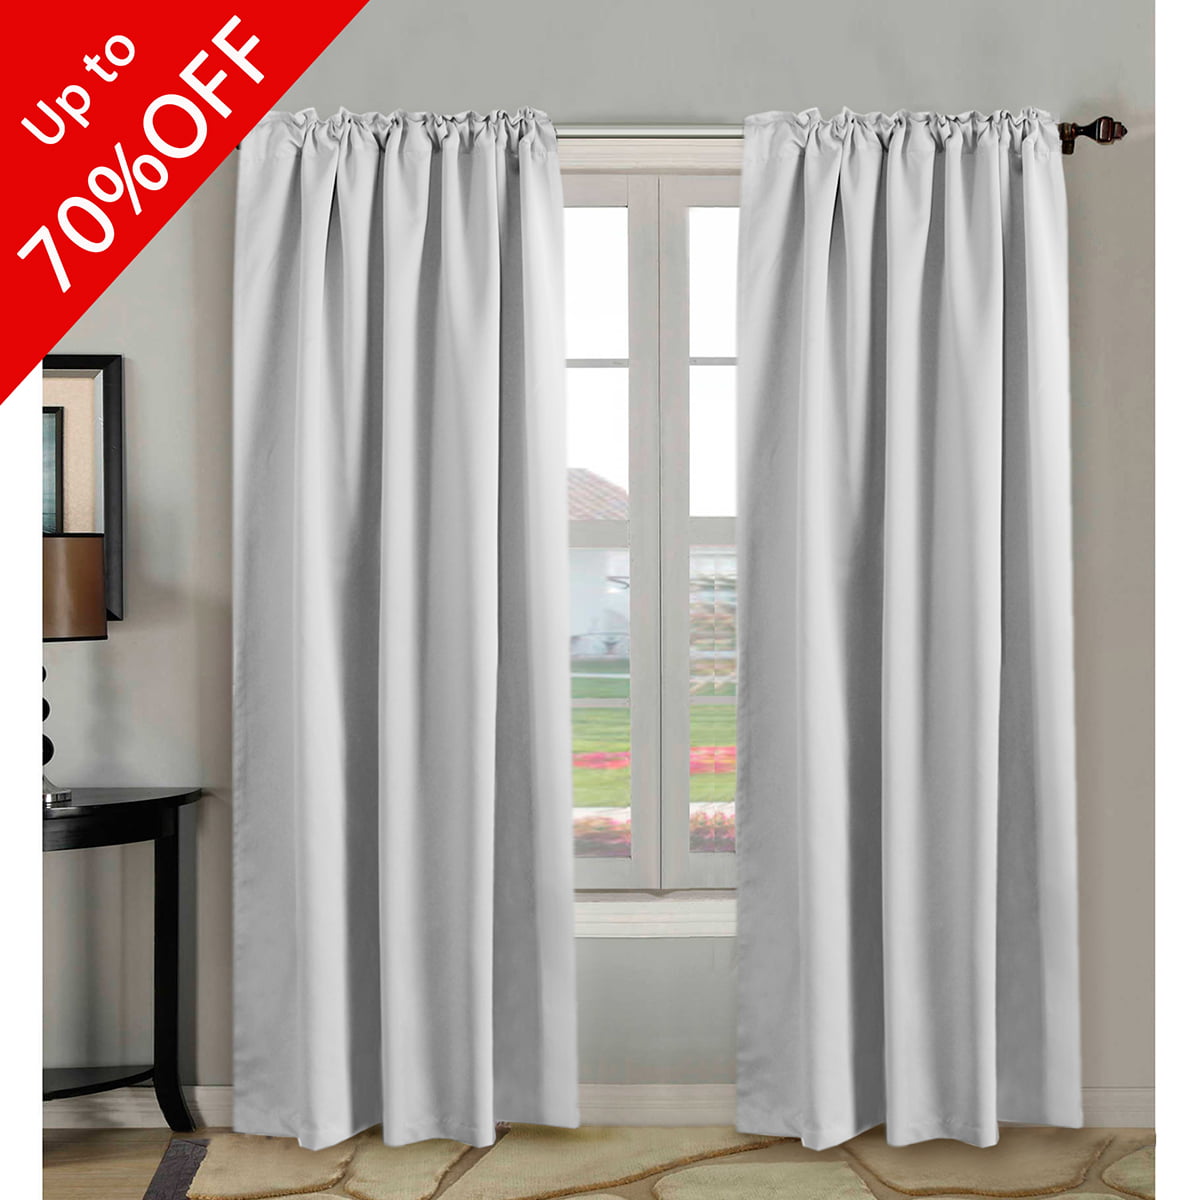 Blackout White Curtains, Thermal Insulated White Drapes for Window